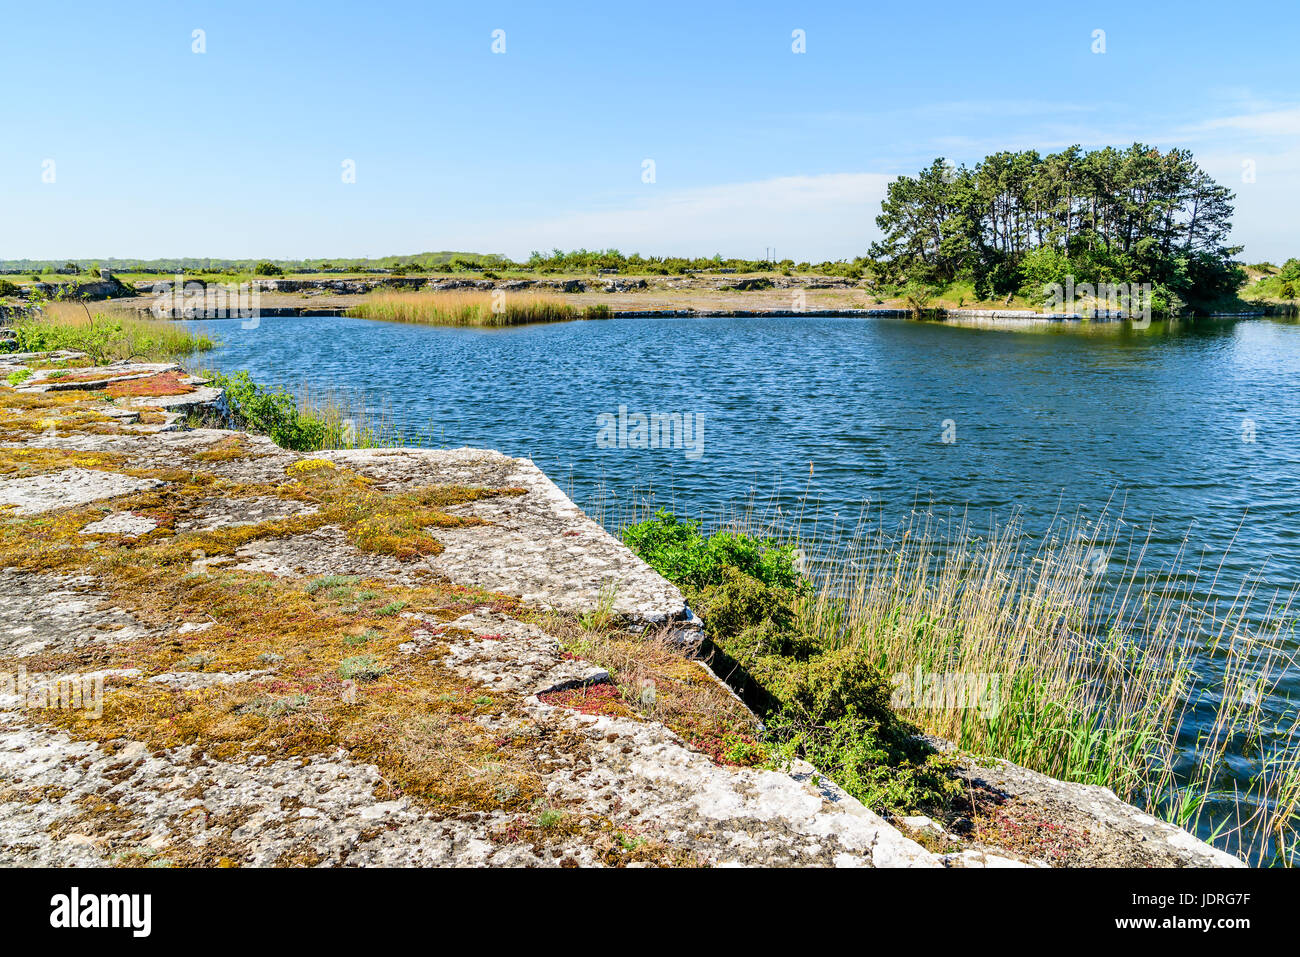 Waterfilled limestone quarry turned into a recreational hiking area after mining operations closed. Location Oland in Sweden. Stock Photo